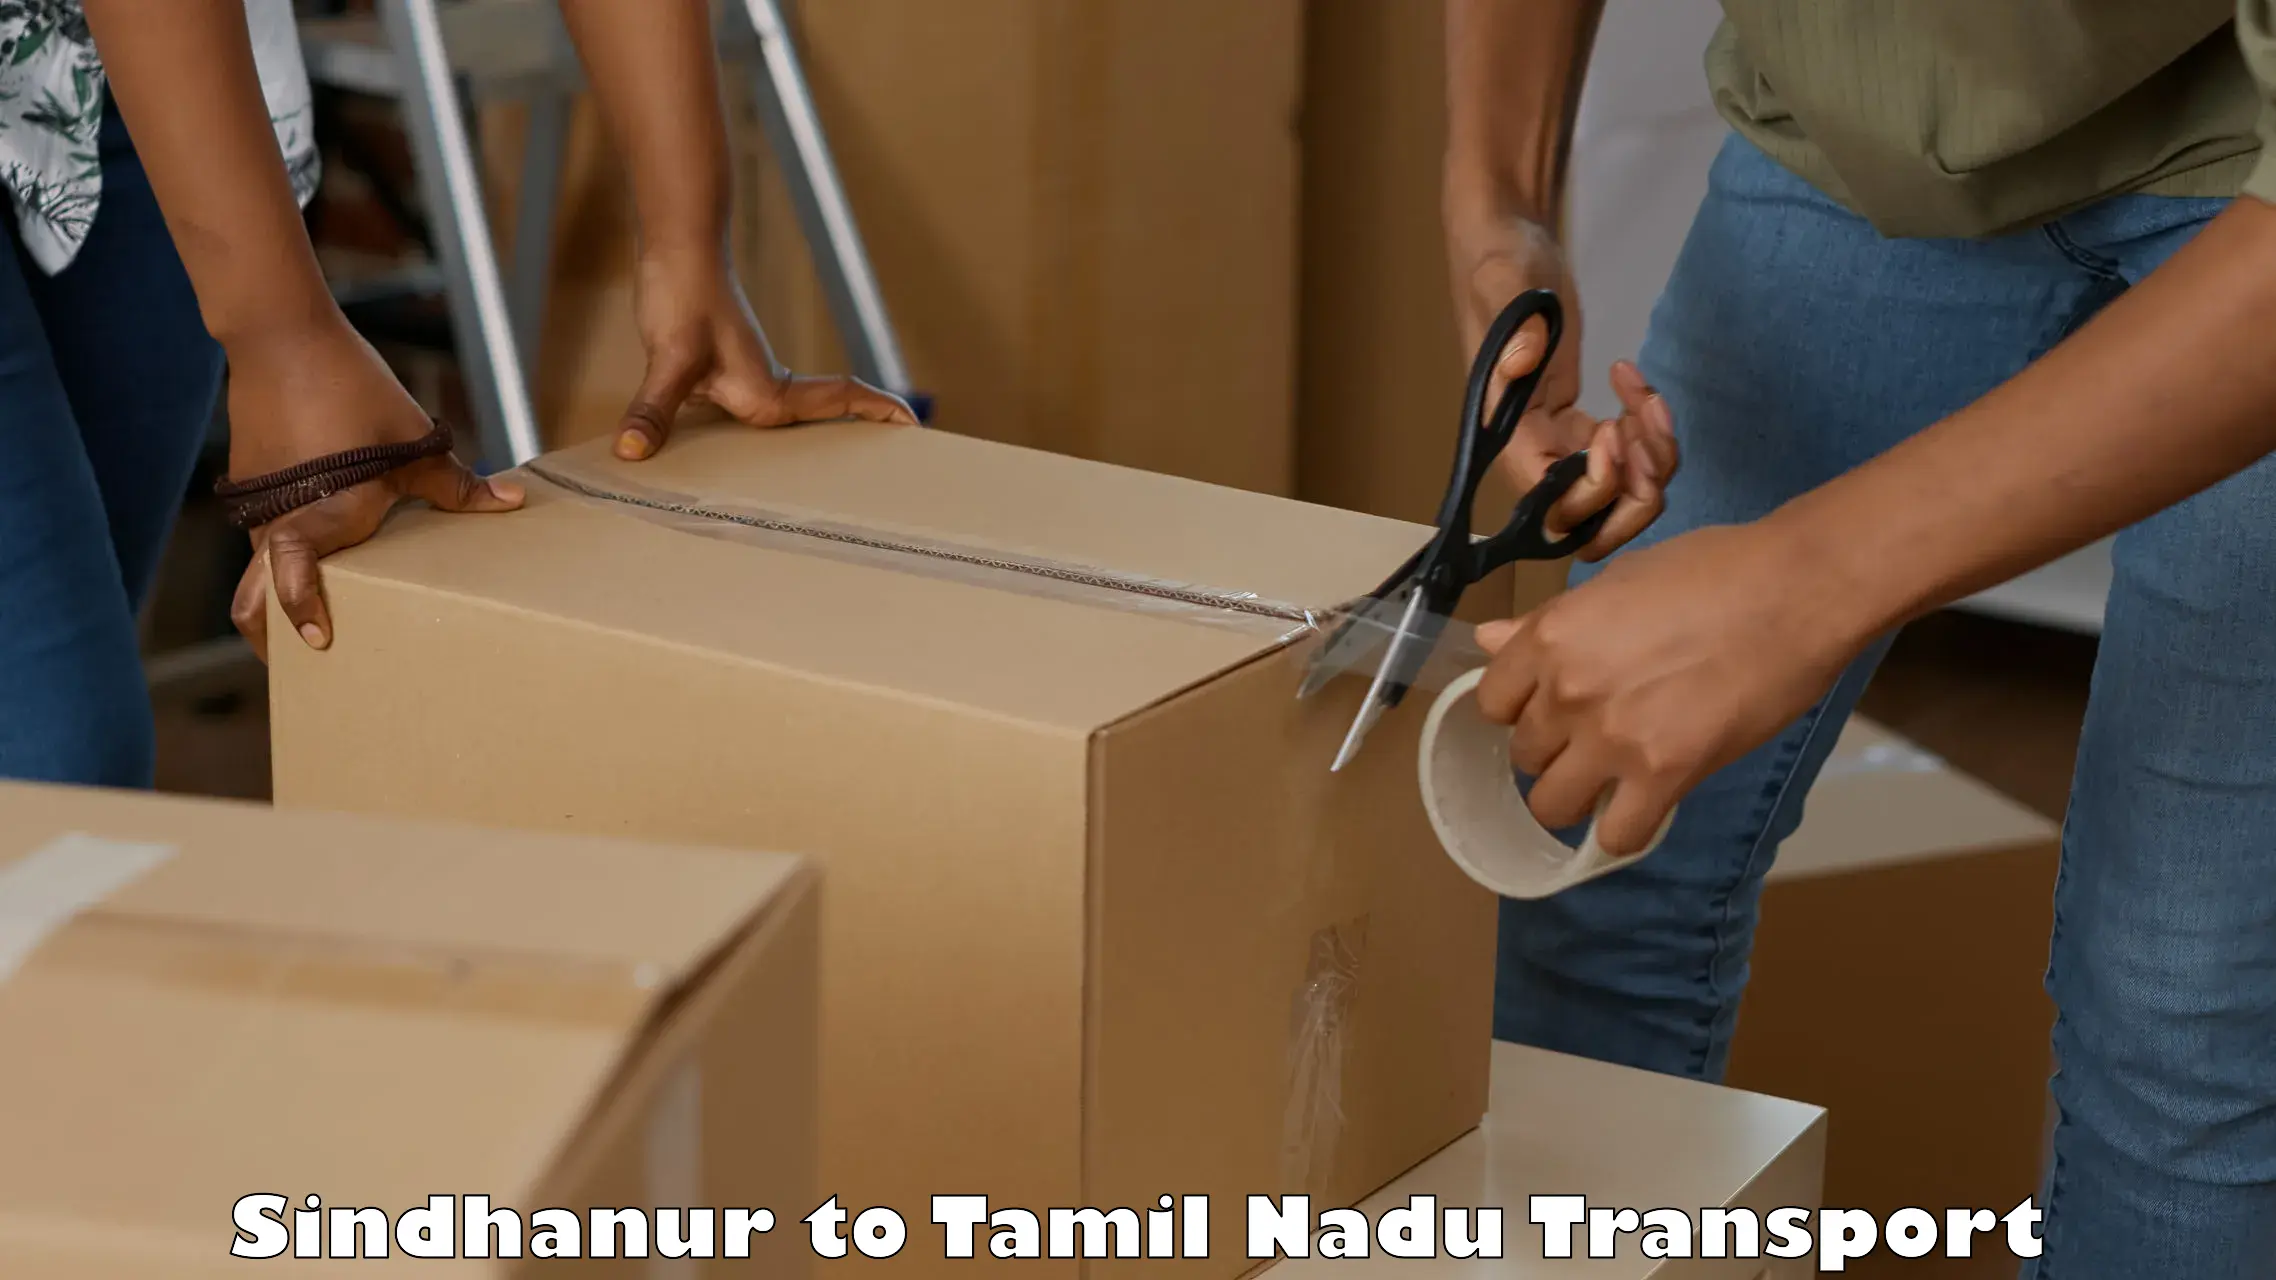 Furniture transport service Sindhanur to SRM Institute of Science and Technology Chennai